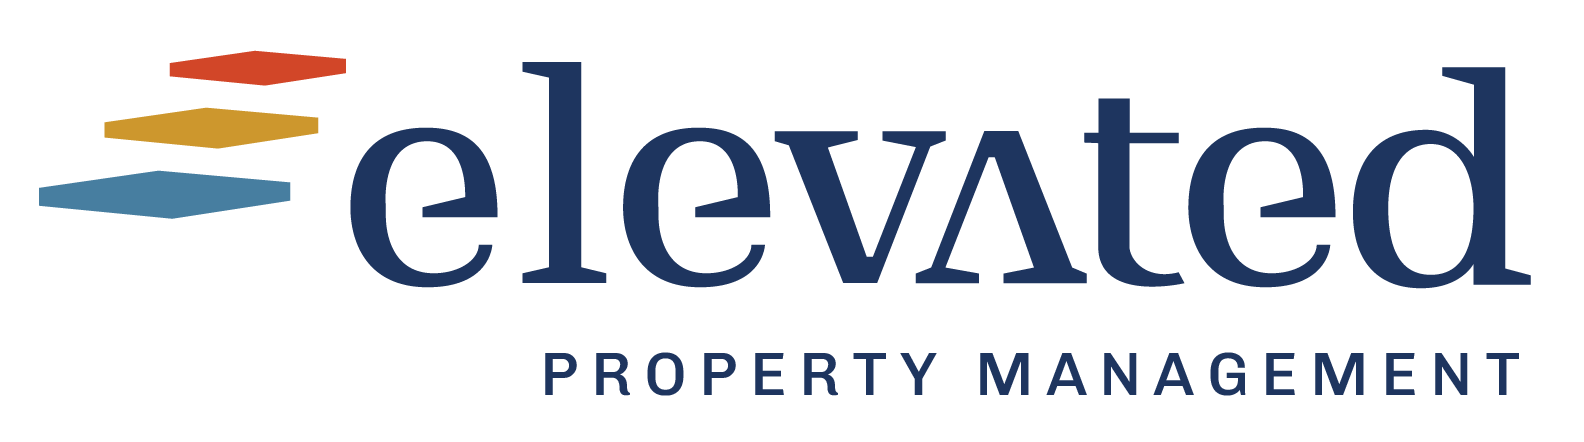 Elevated Property Management